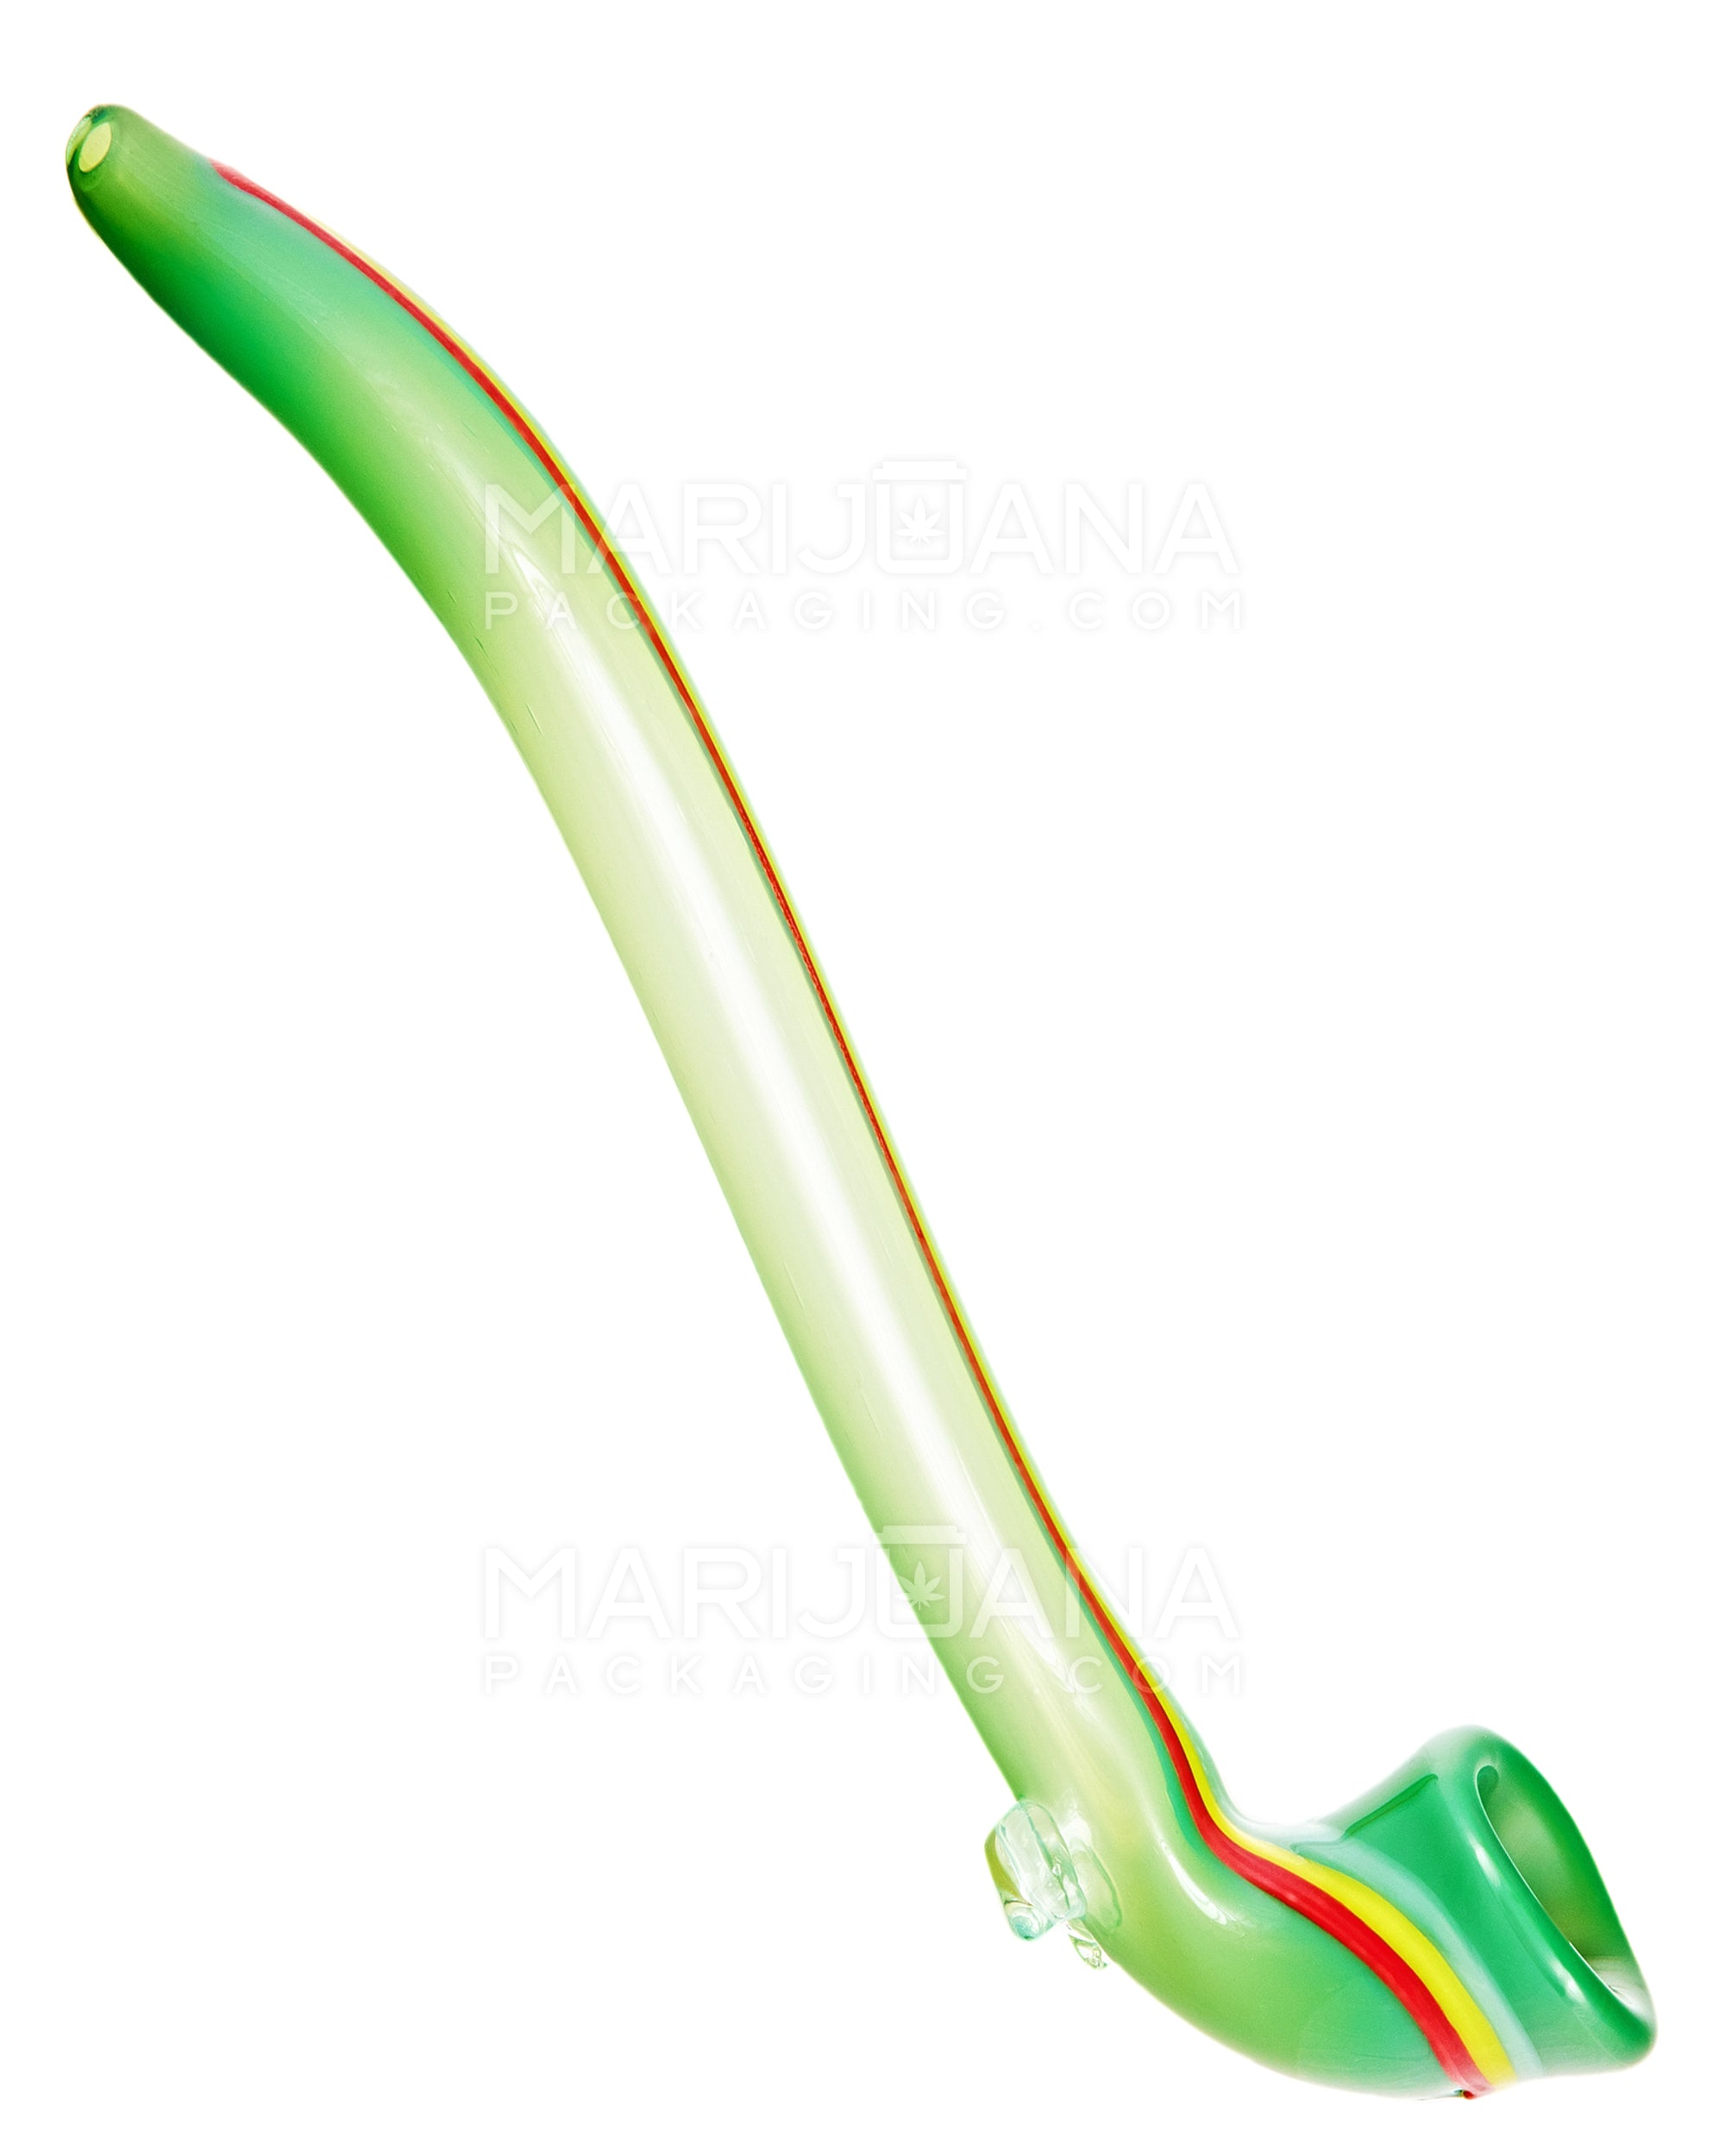 USA Glass | Striped Giant Sherlock Pipe | 15in Long - Glass - Assorted - 1